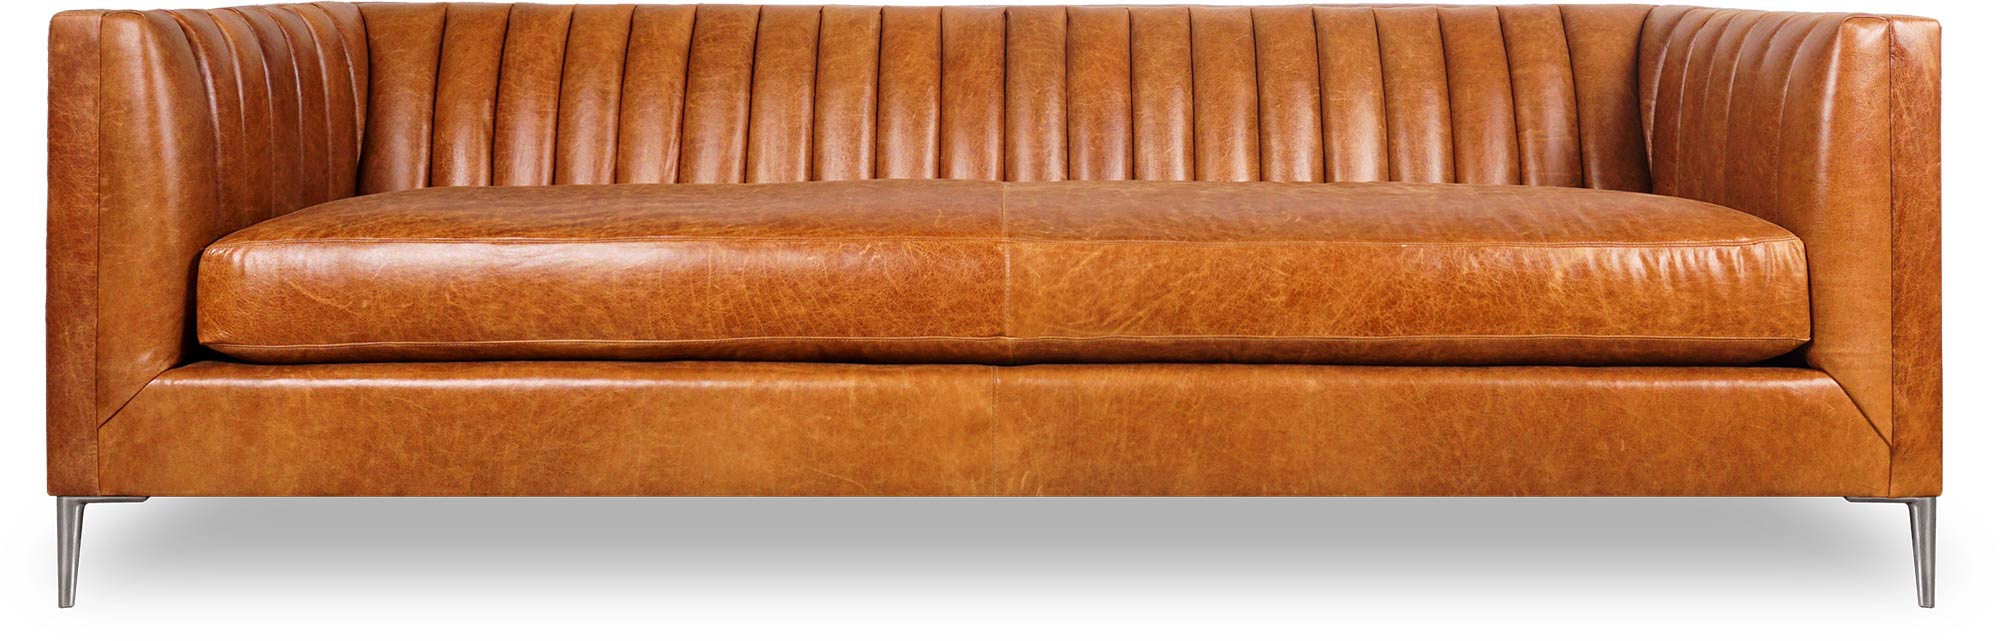 Modern Channel Tufted Shelter Sofas, Tufted Leather Sectional Couch